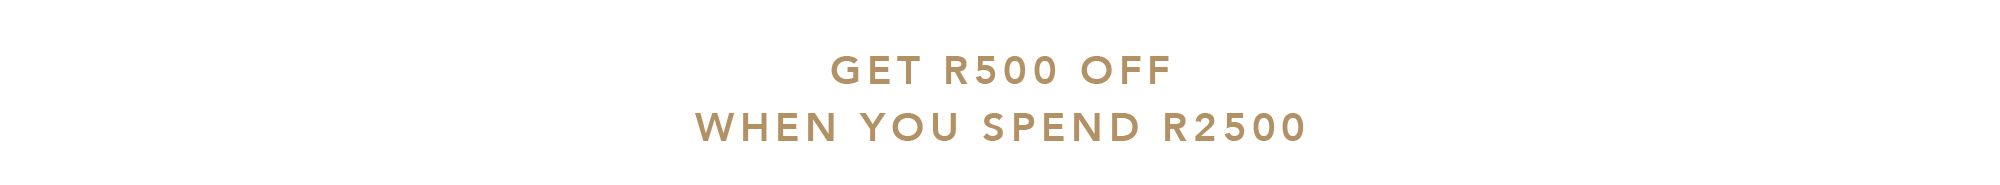 GET R500 OFF WHEN YOU SPEND R2500